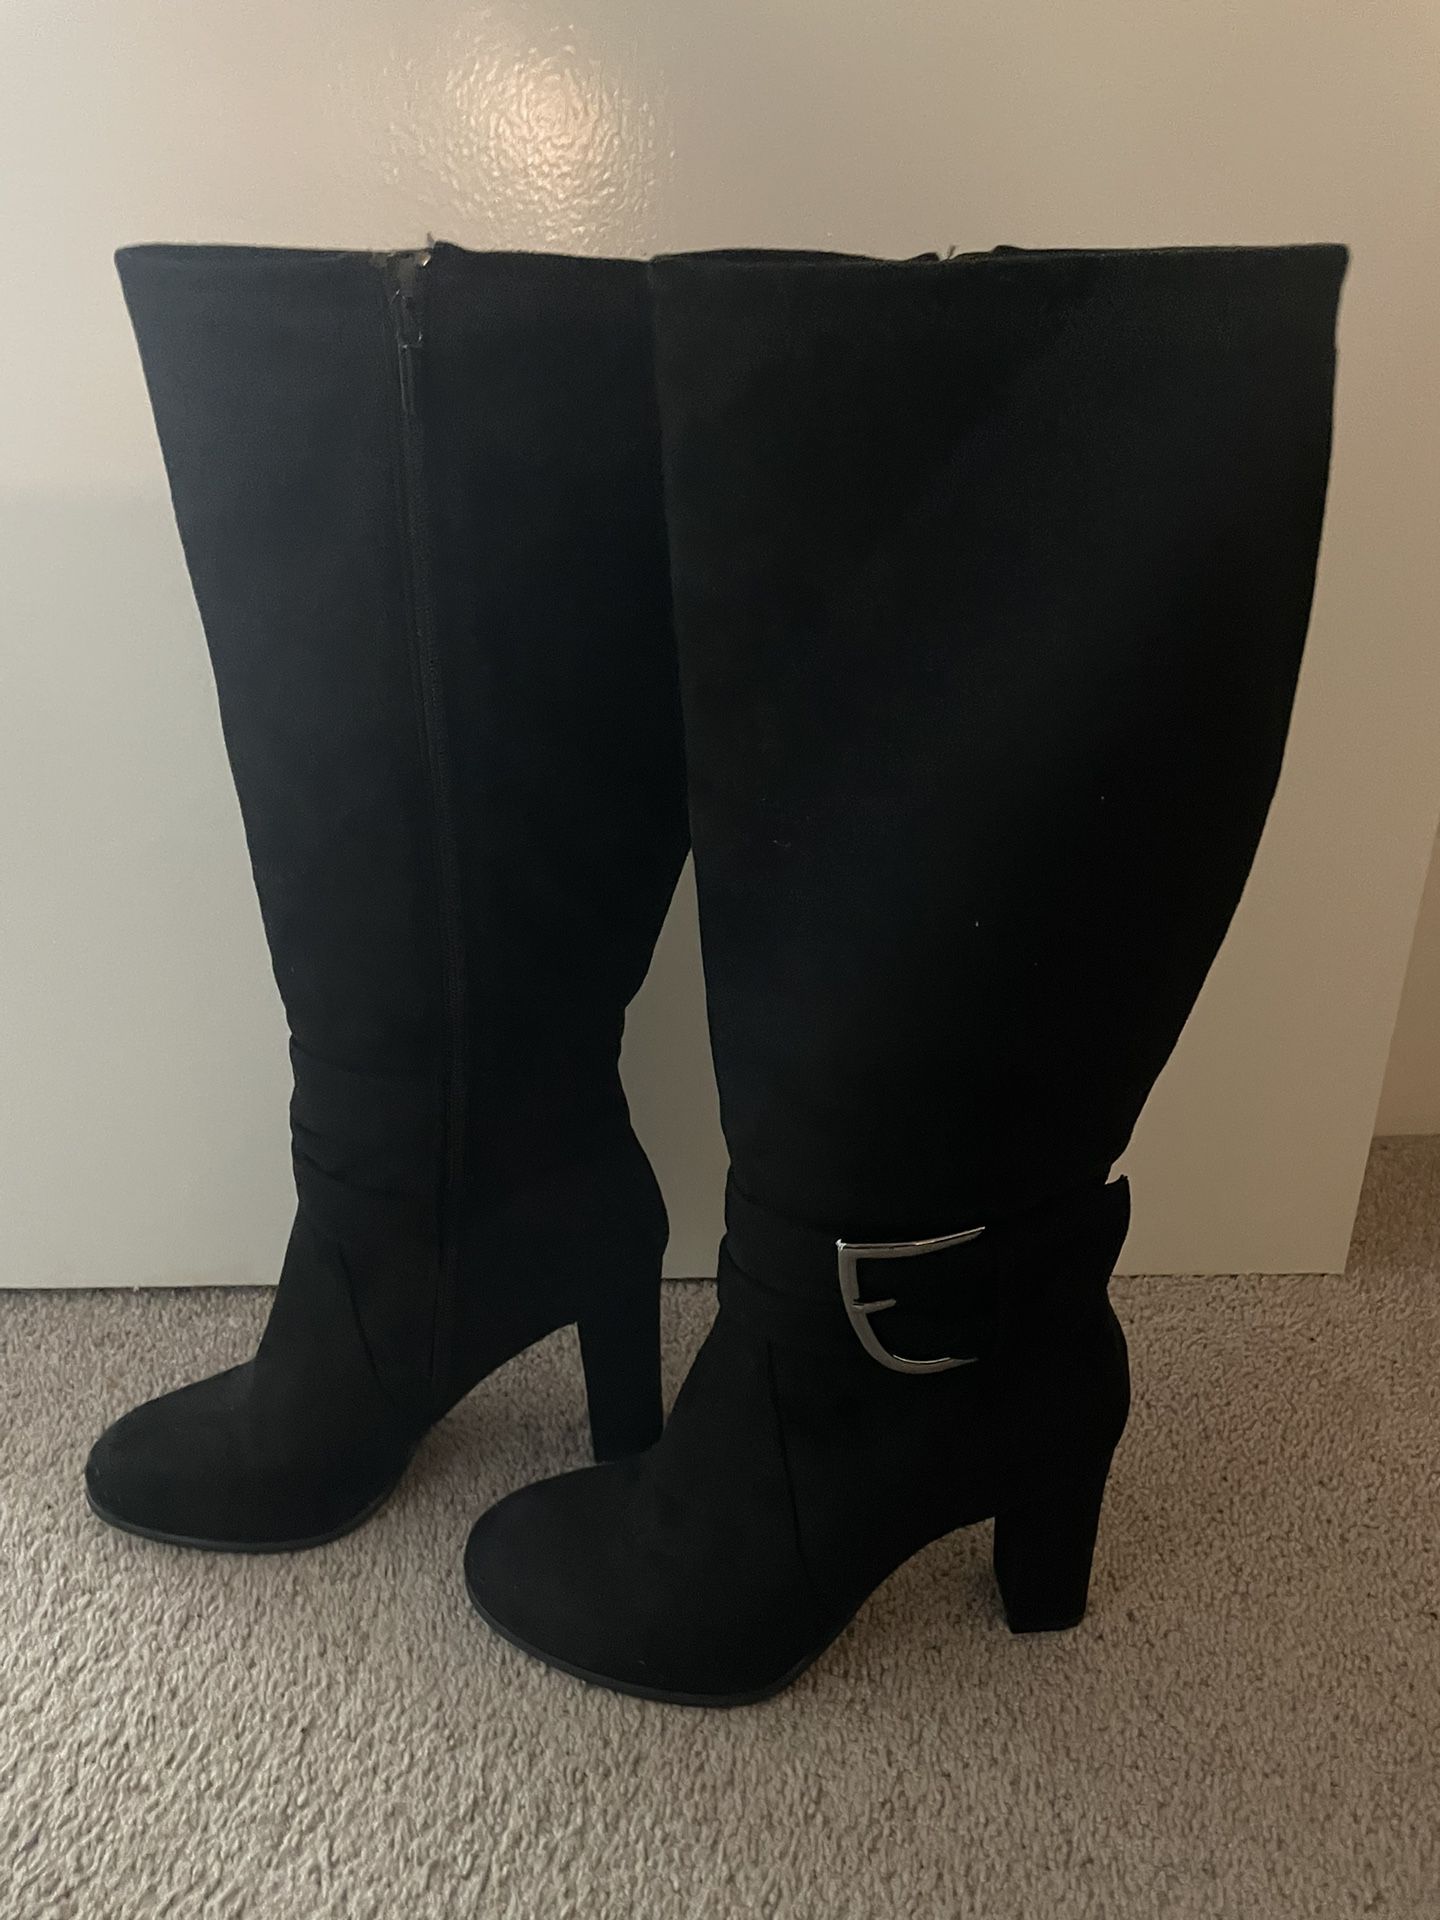 Black Boots - Womens Size 9